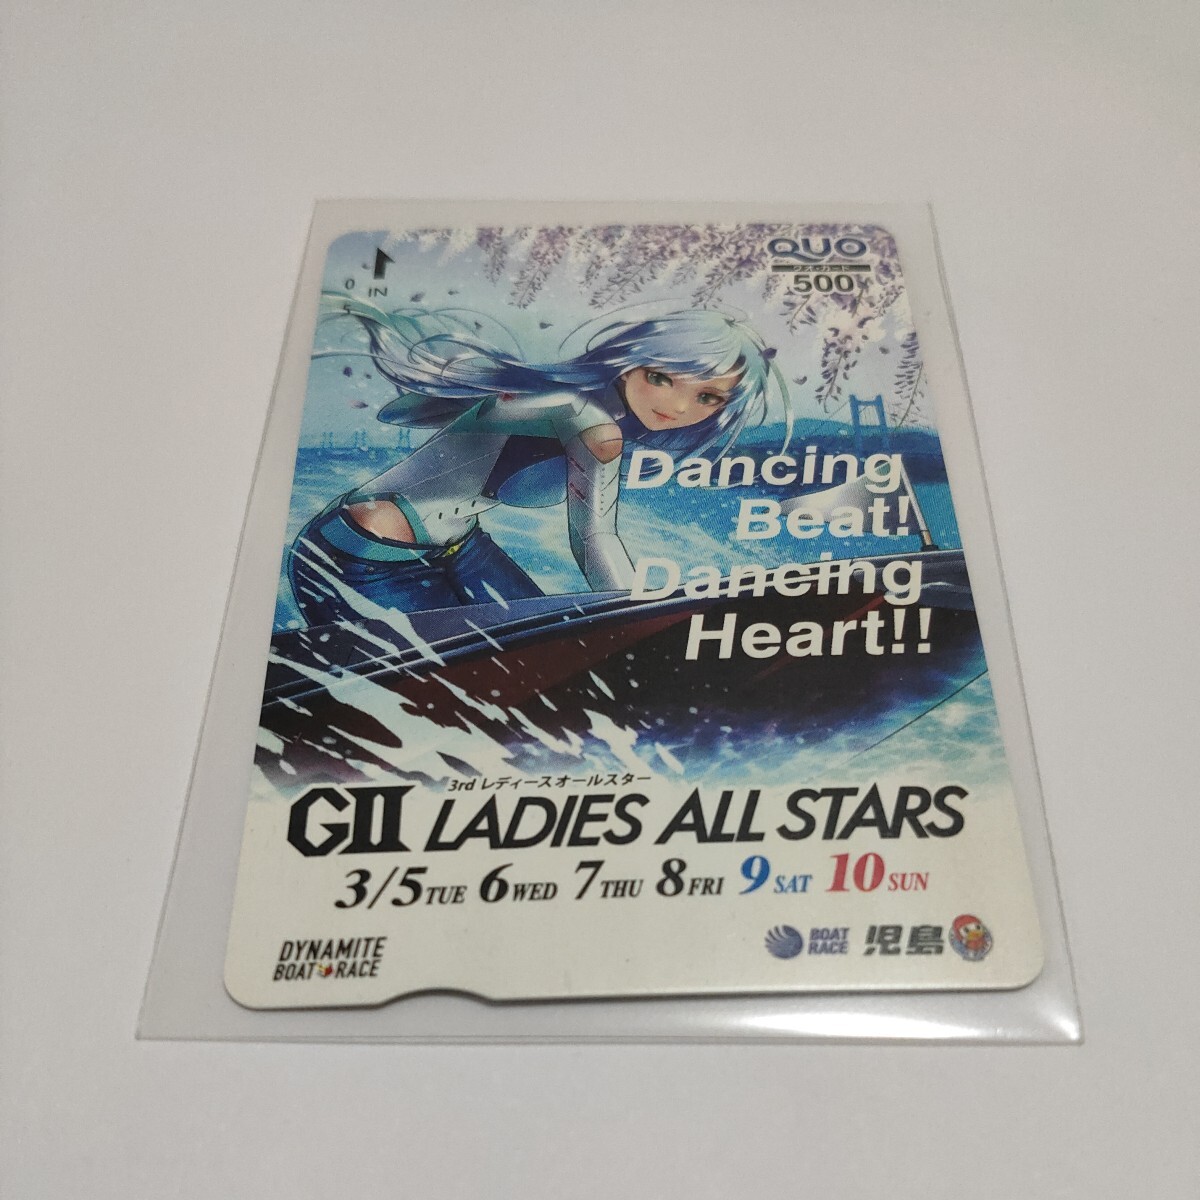 [ free shipping QUO card ] boat race . island, lady's all Star.